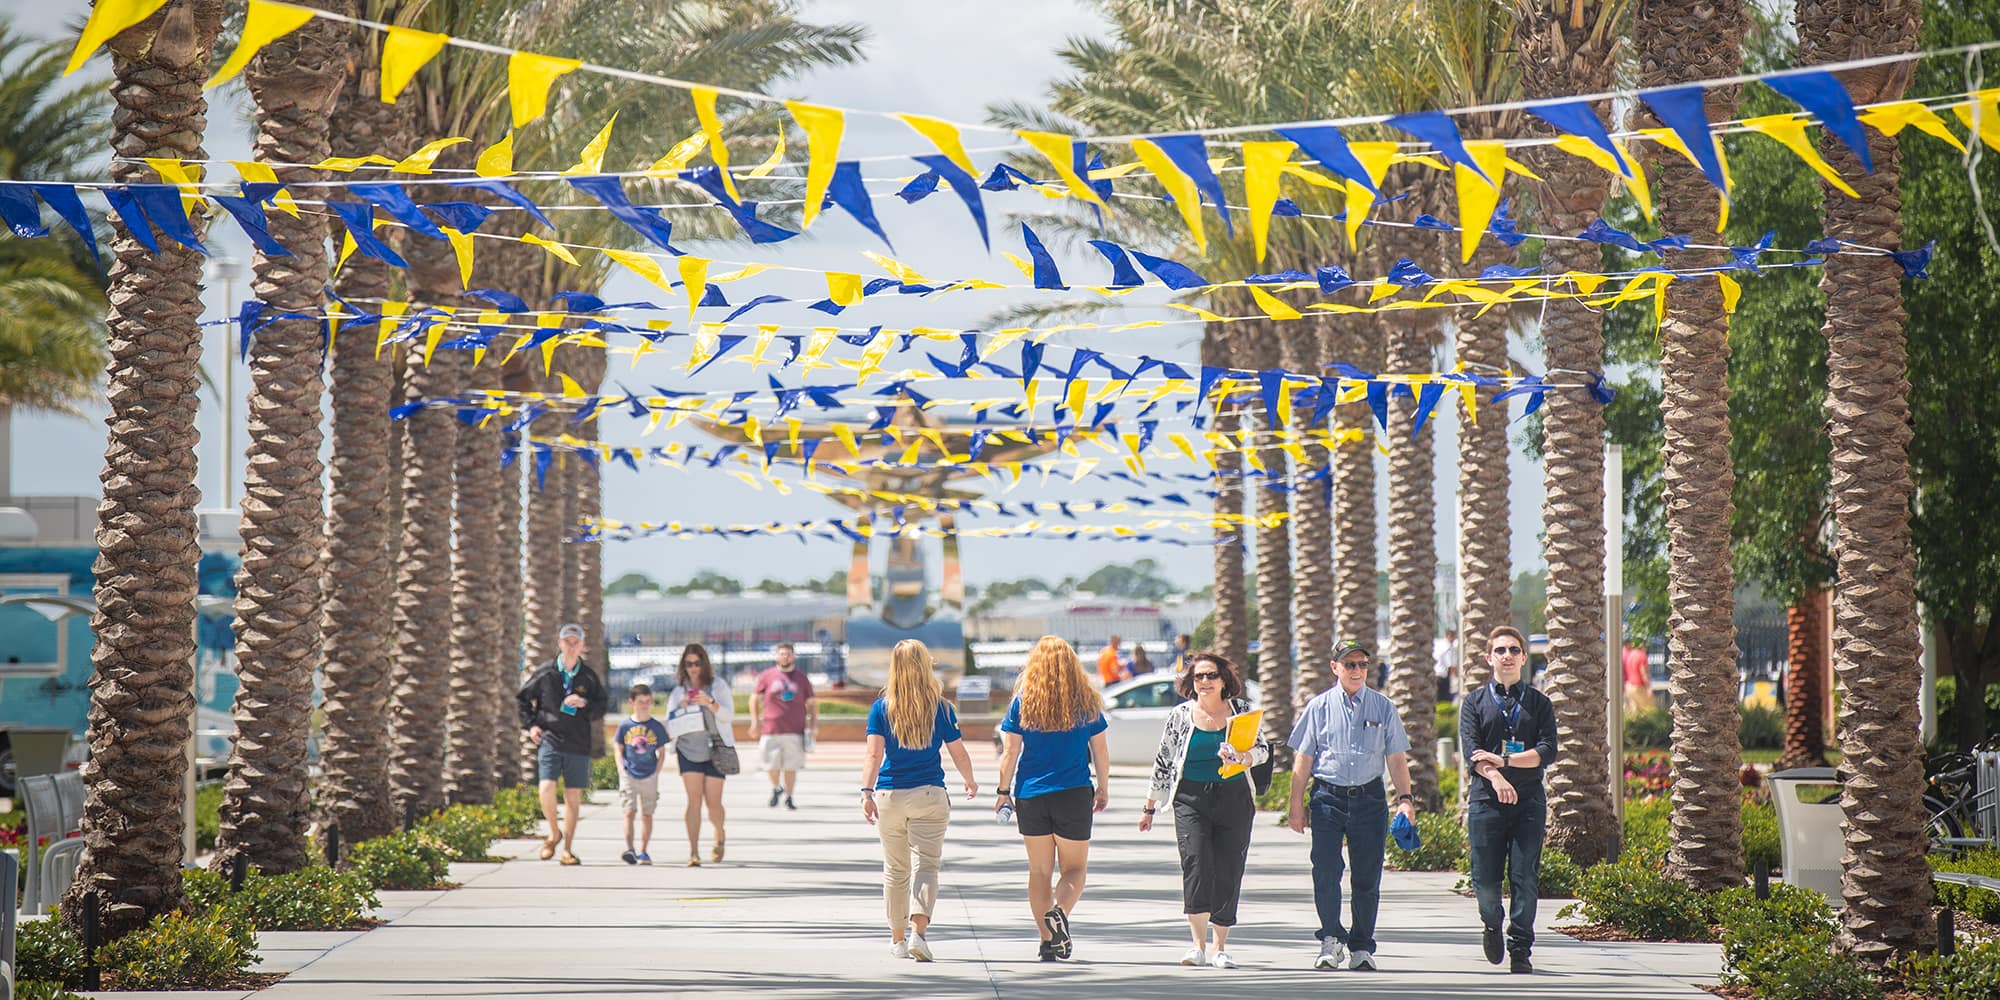 Students and family walk through rows of palm trees, along the Daytona Beach Campus promenade, which is draped with yellow and blue flag garland.